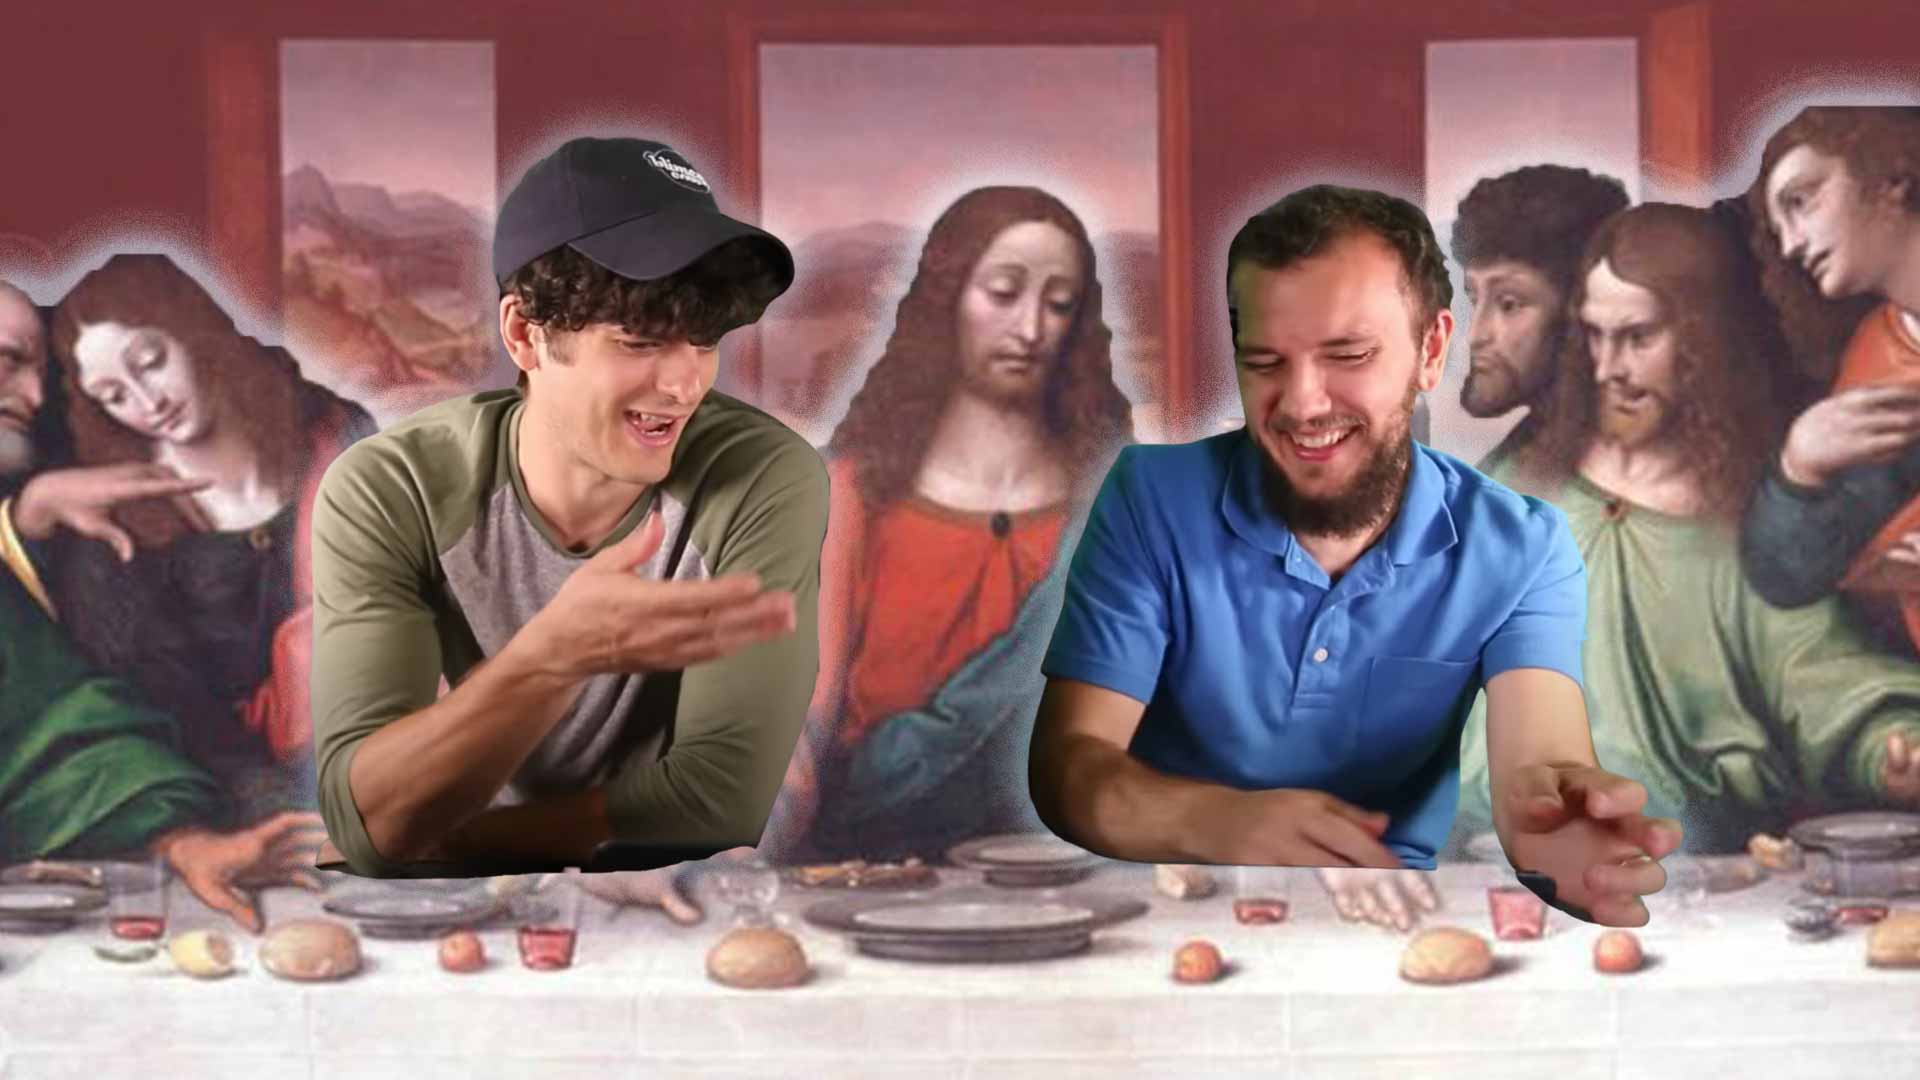 Blimey Cow Brothers are cut out and put on the classic "Last Supper" painting of Jesus and his disciples